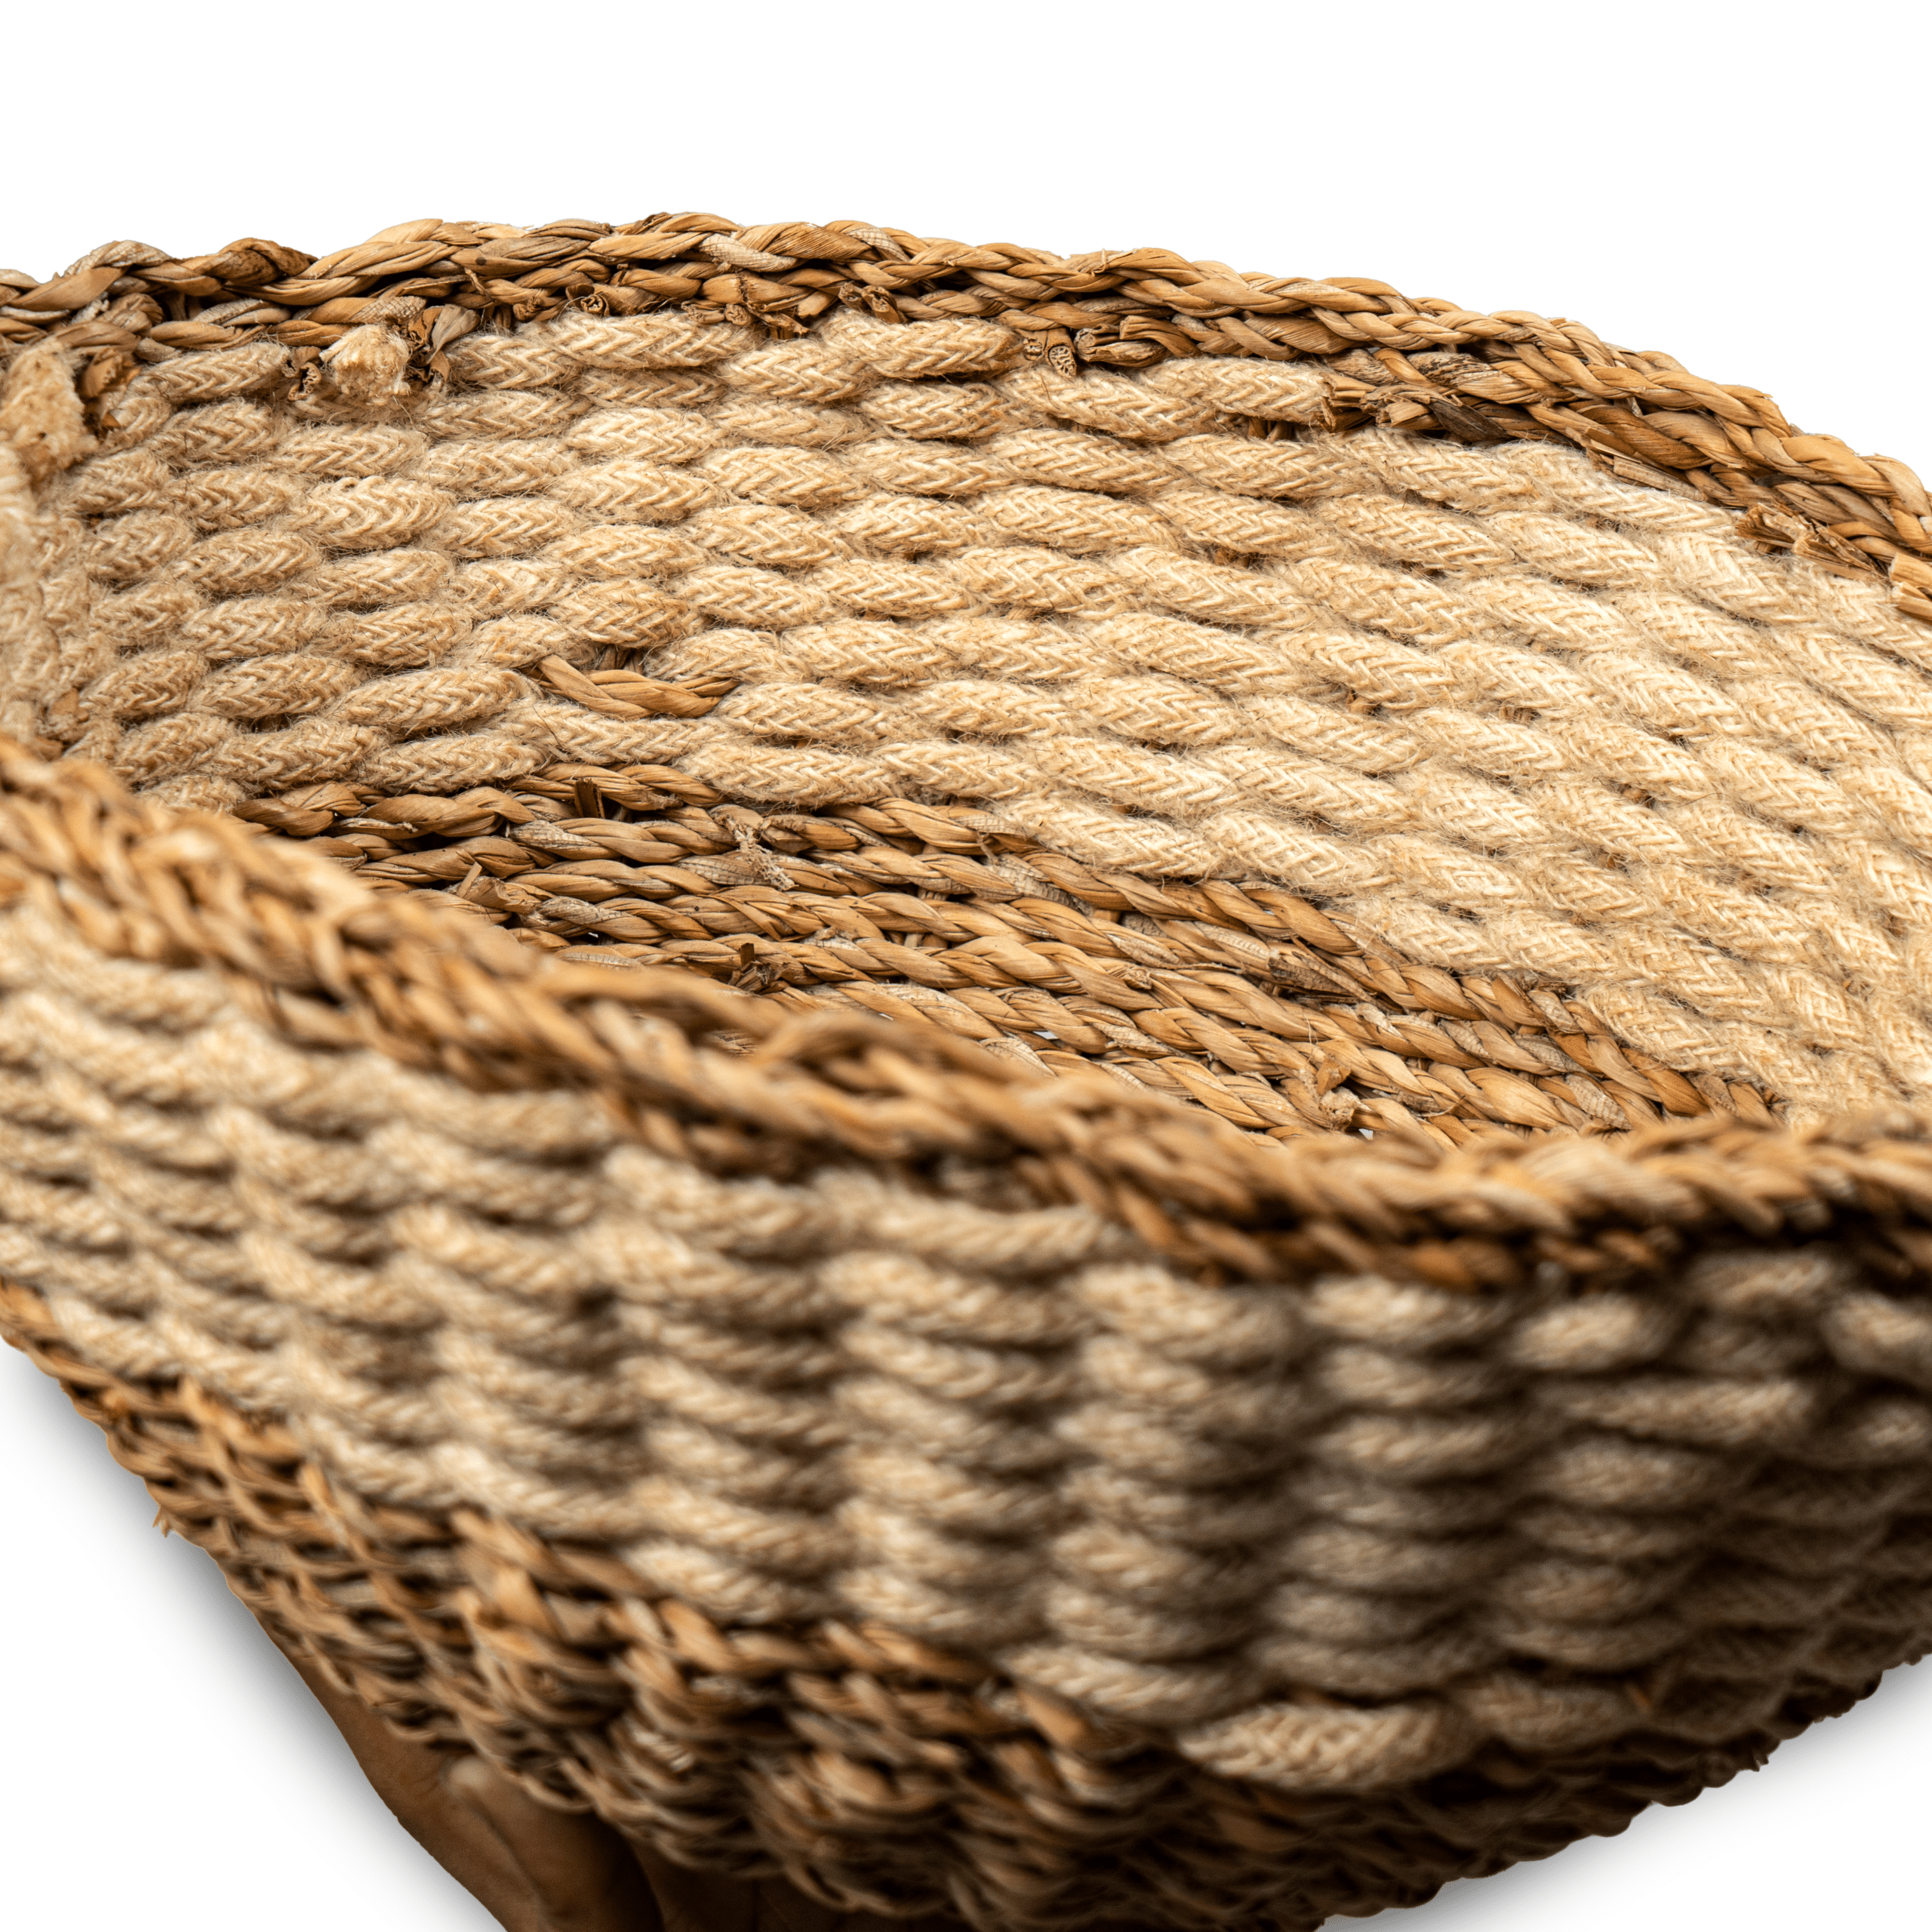 Tapered Seagrass Bowl Basket with Handles- ICSGHFB9 (2)